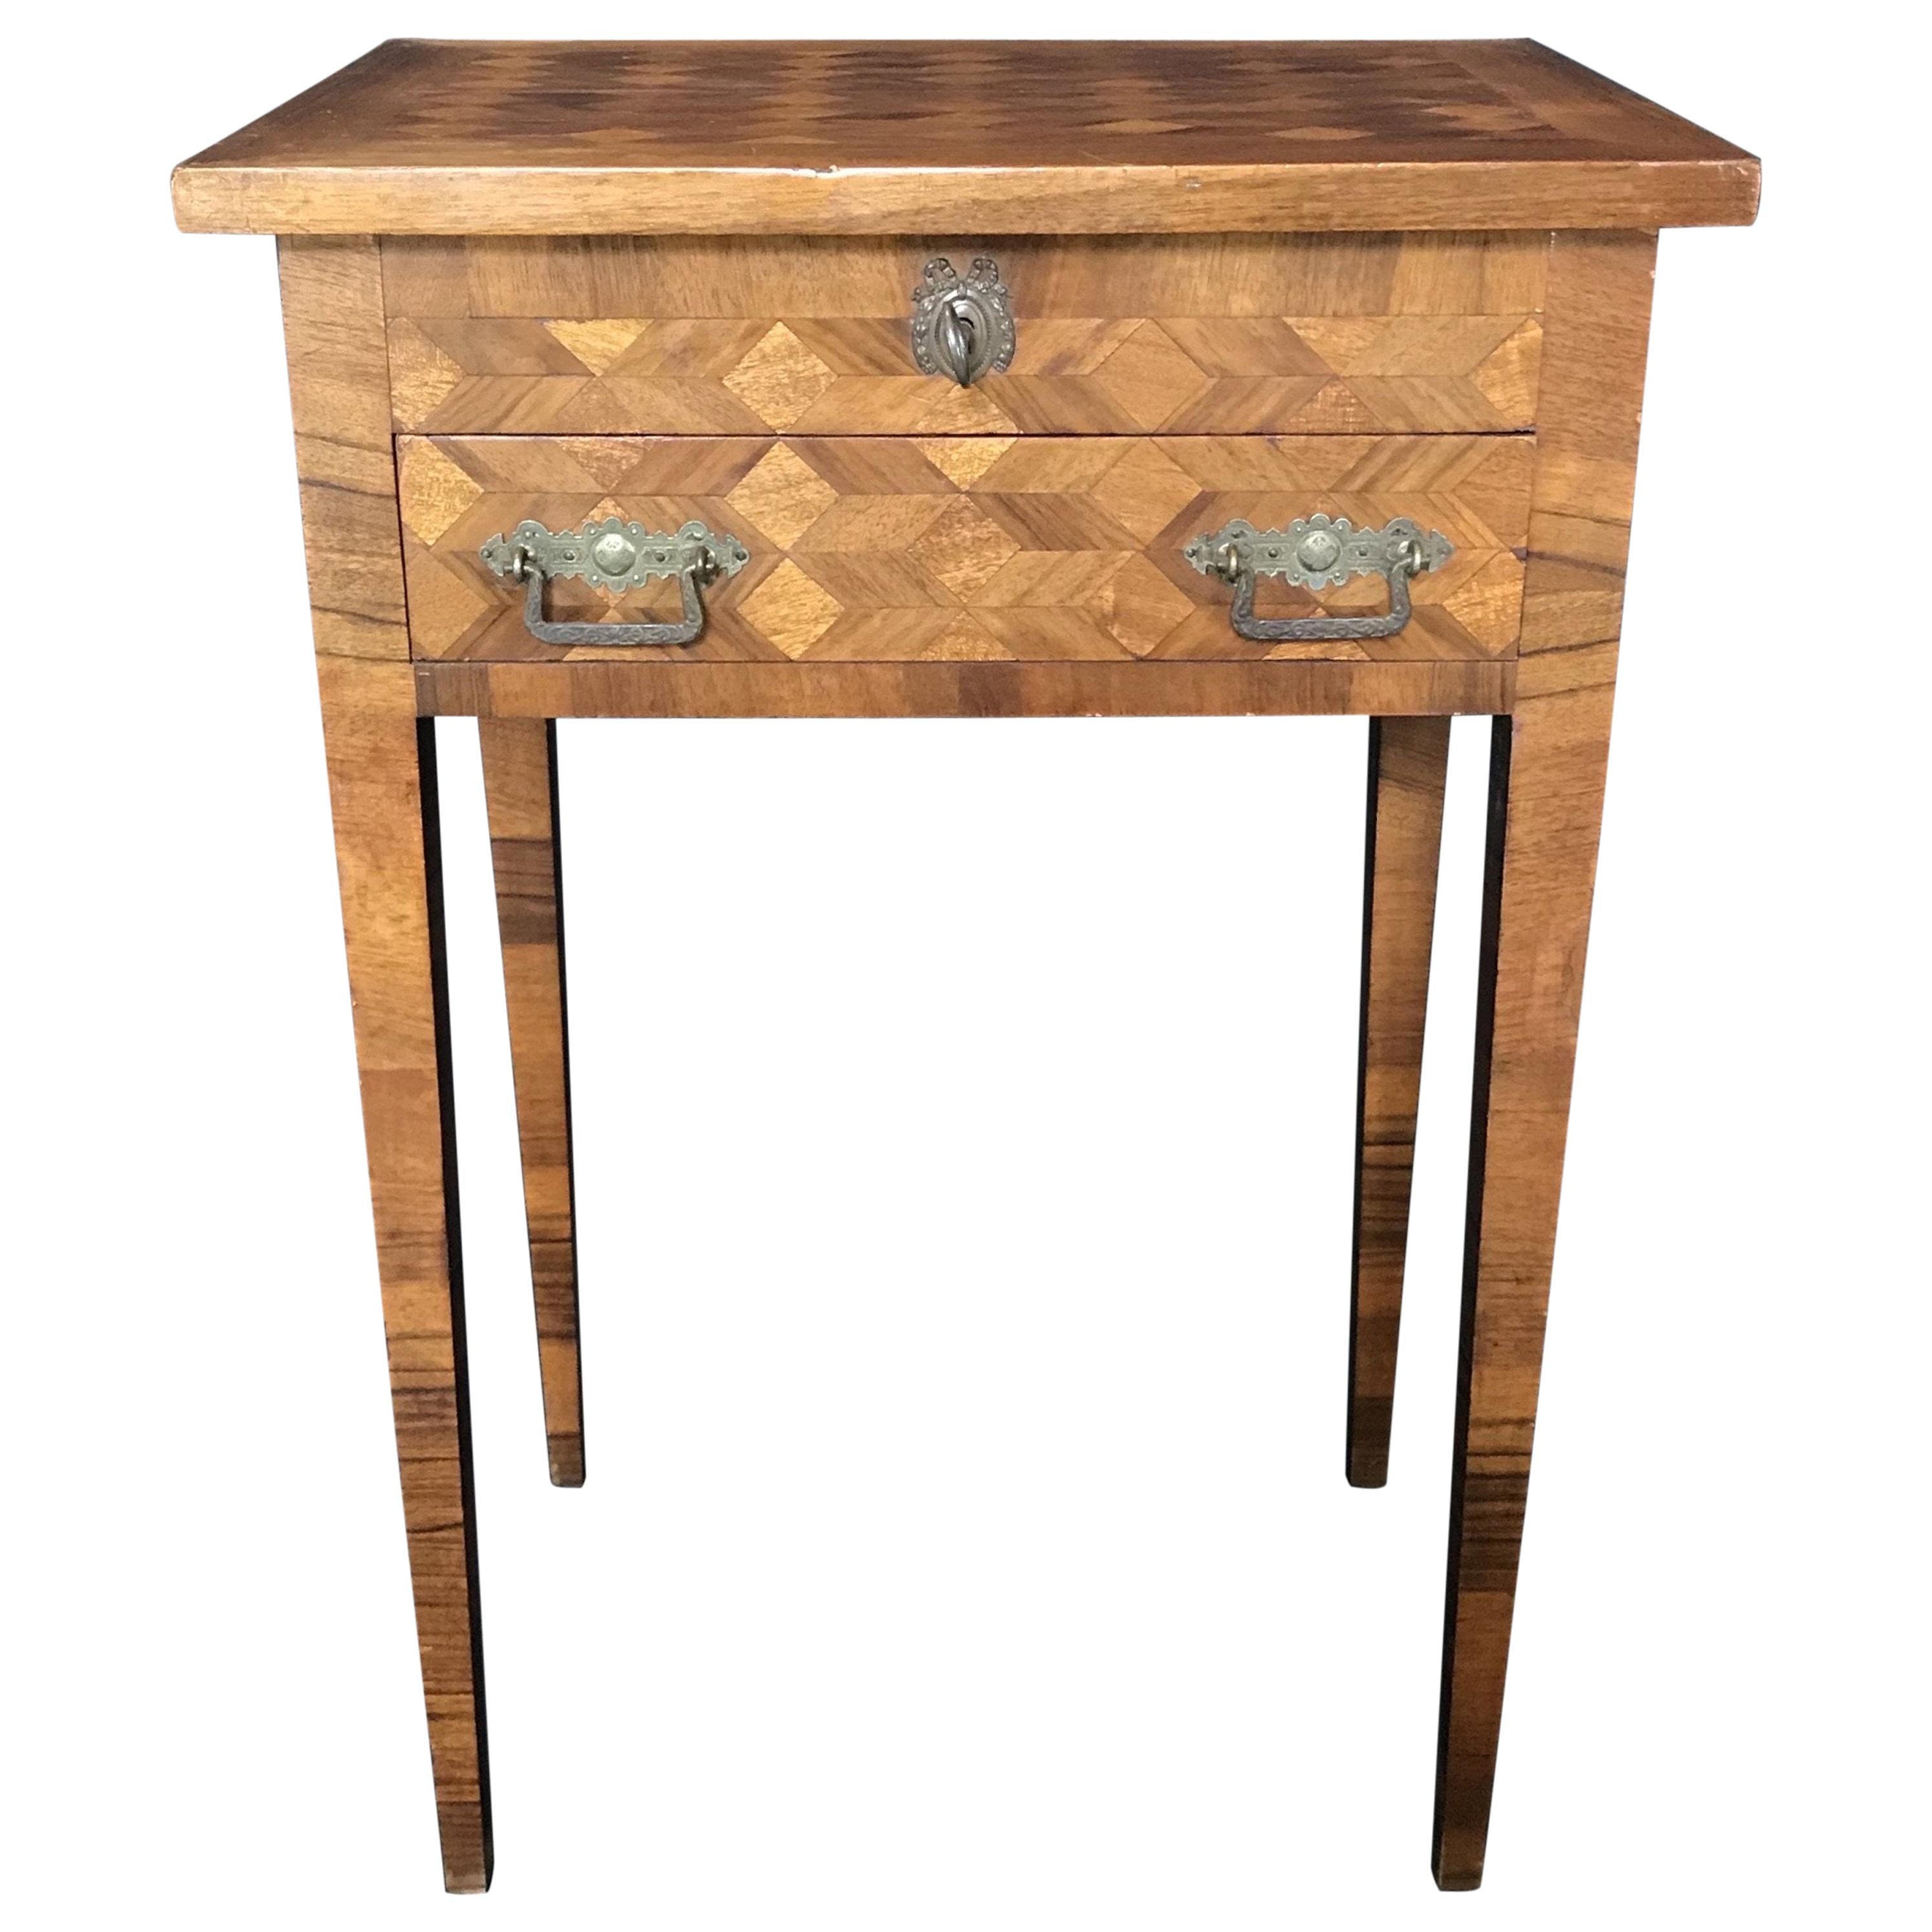 Lovely French Walnut Parquetry Side Table or Nightstand